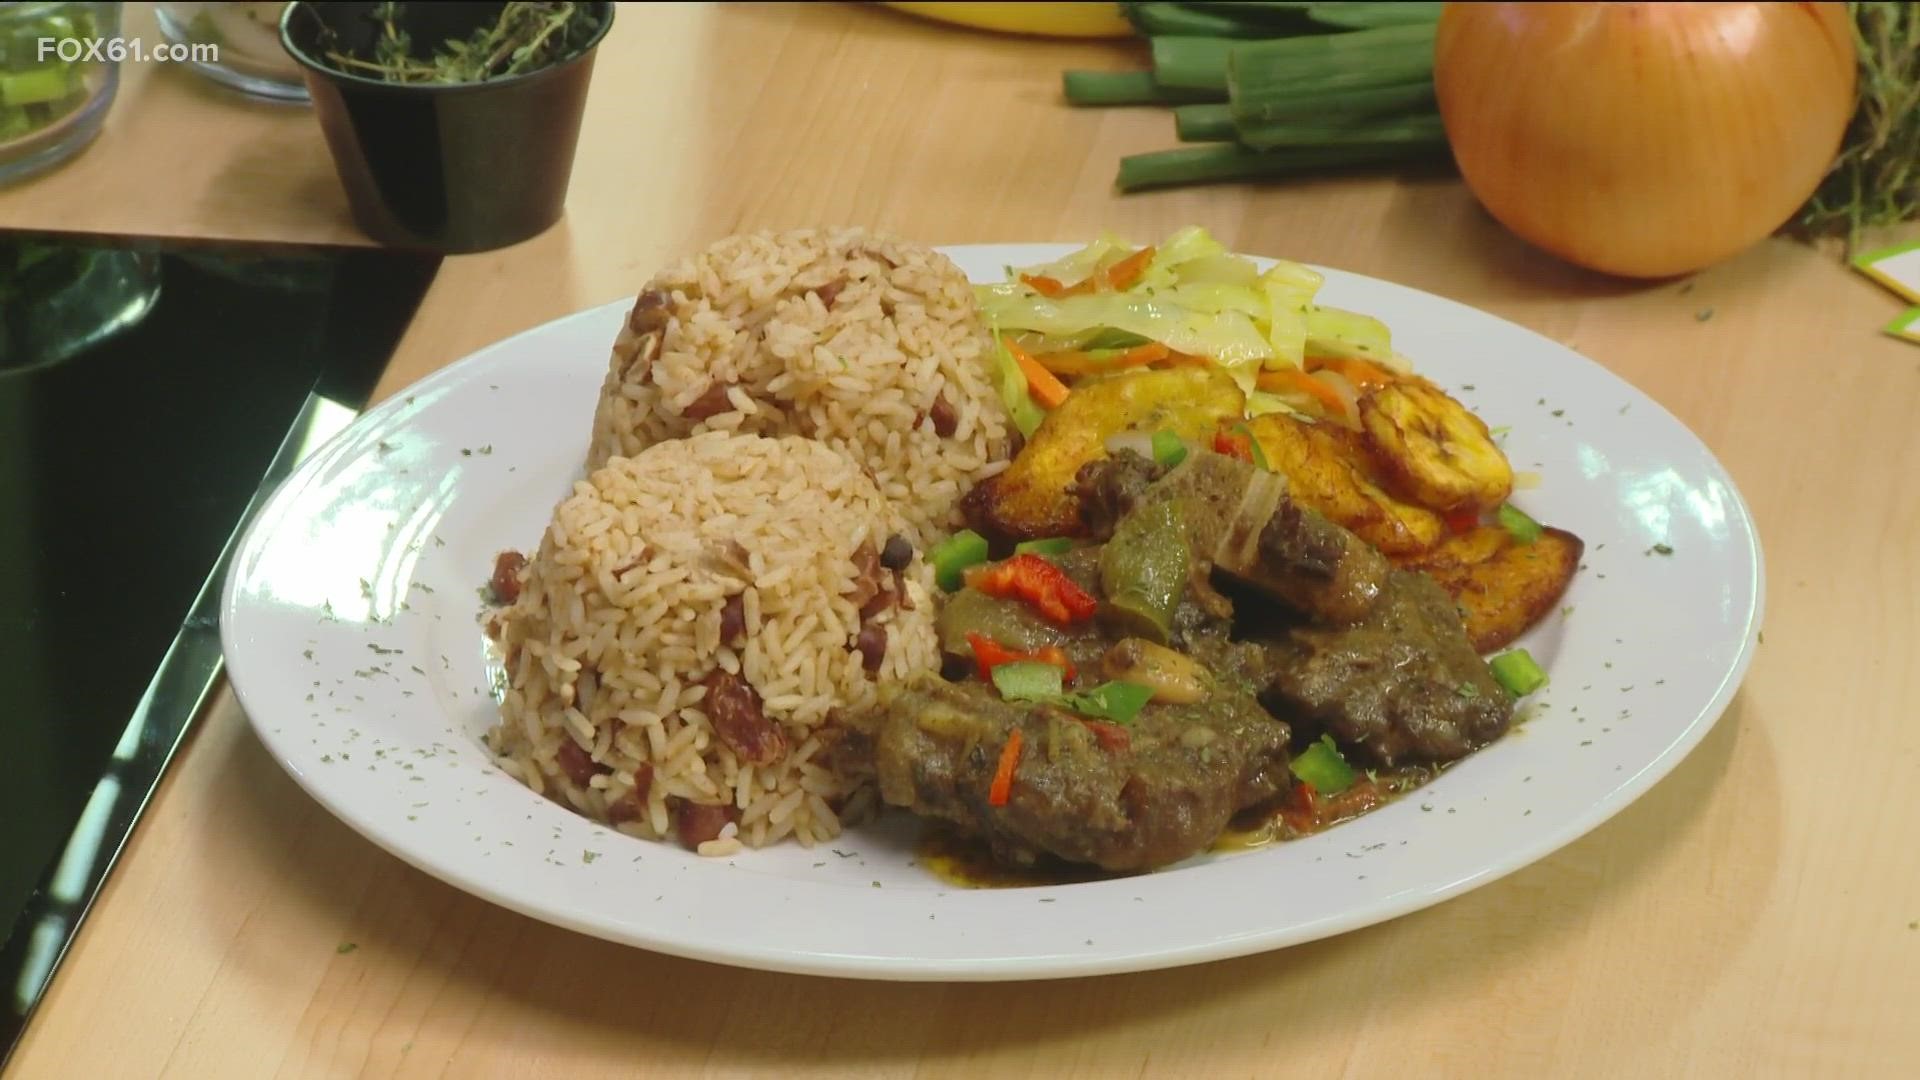 The Russell Restaurant makes oxtail, one of the many dishes found at the authentic Caribbean establishment.